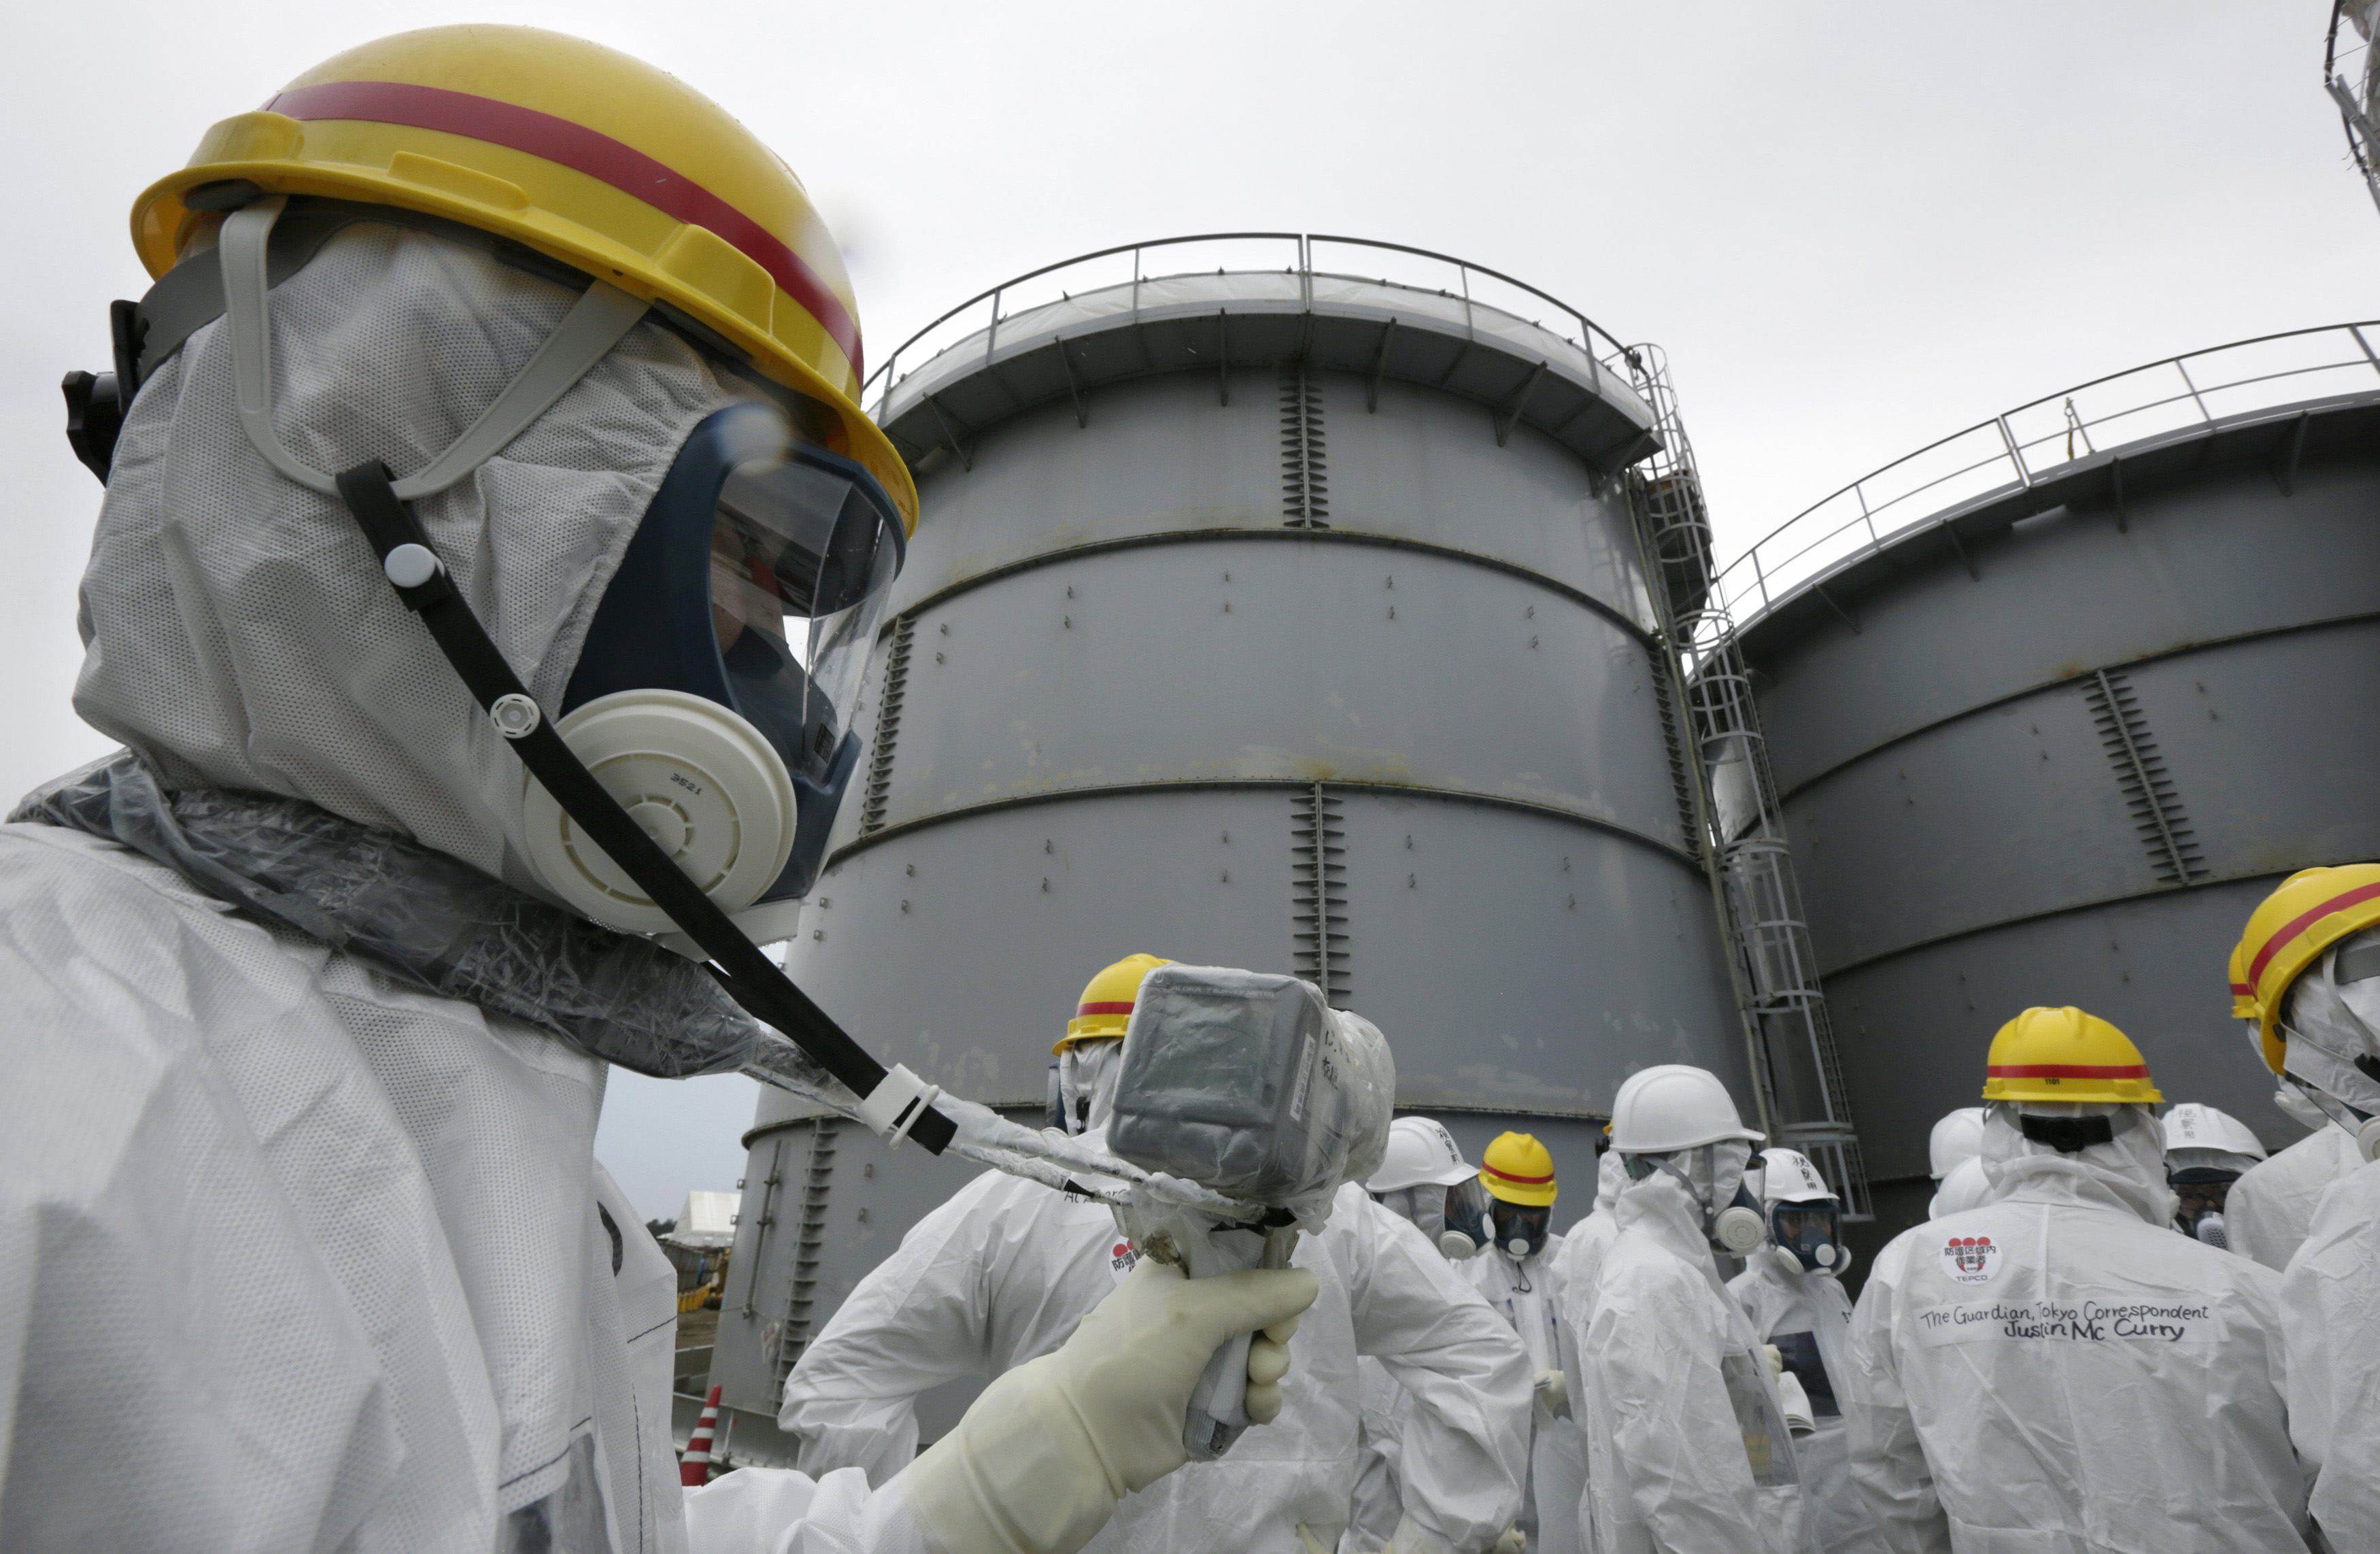 A Tokyo Electric Power Co employee wearing a protective suit and mask uses a survey meter near storage tanks for radioactive water. Photo: Reuters/File